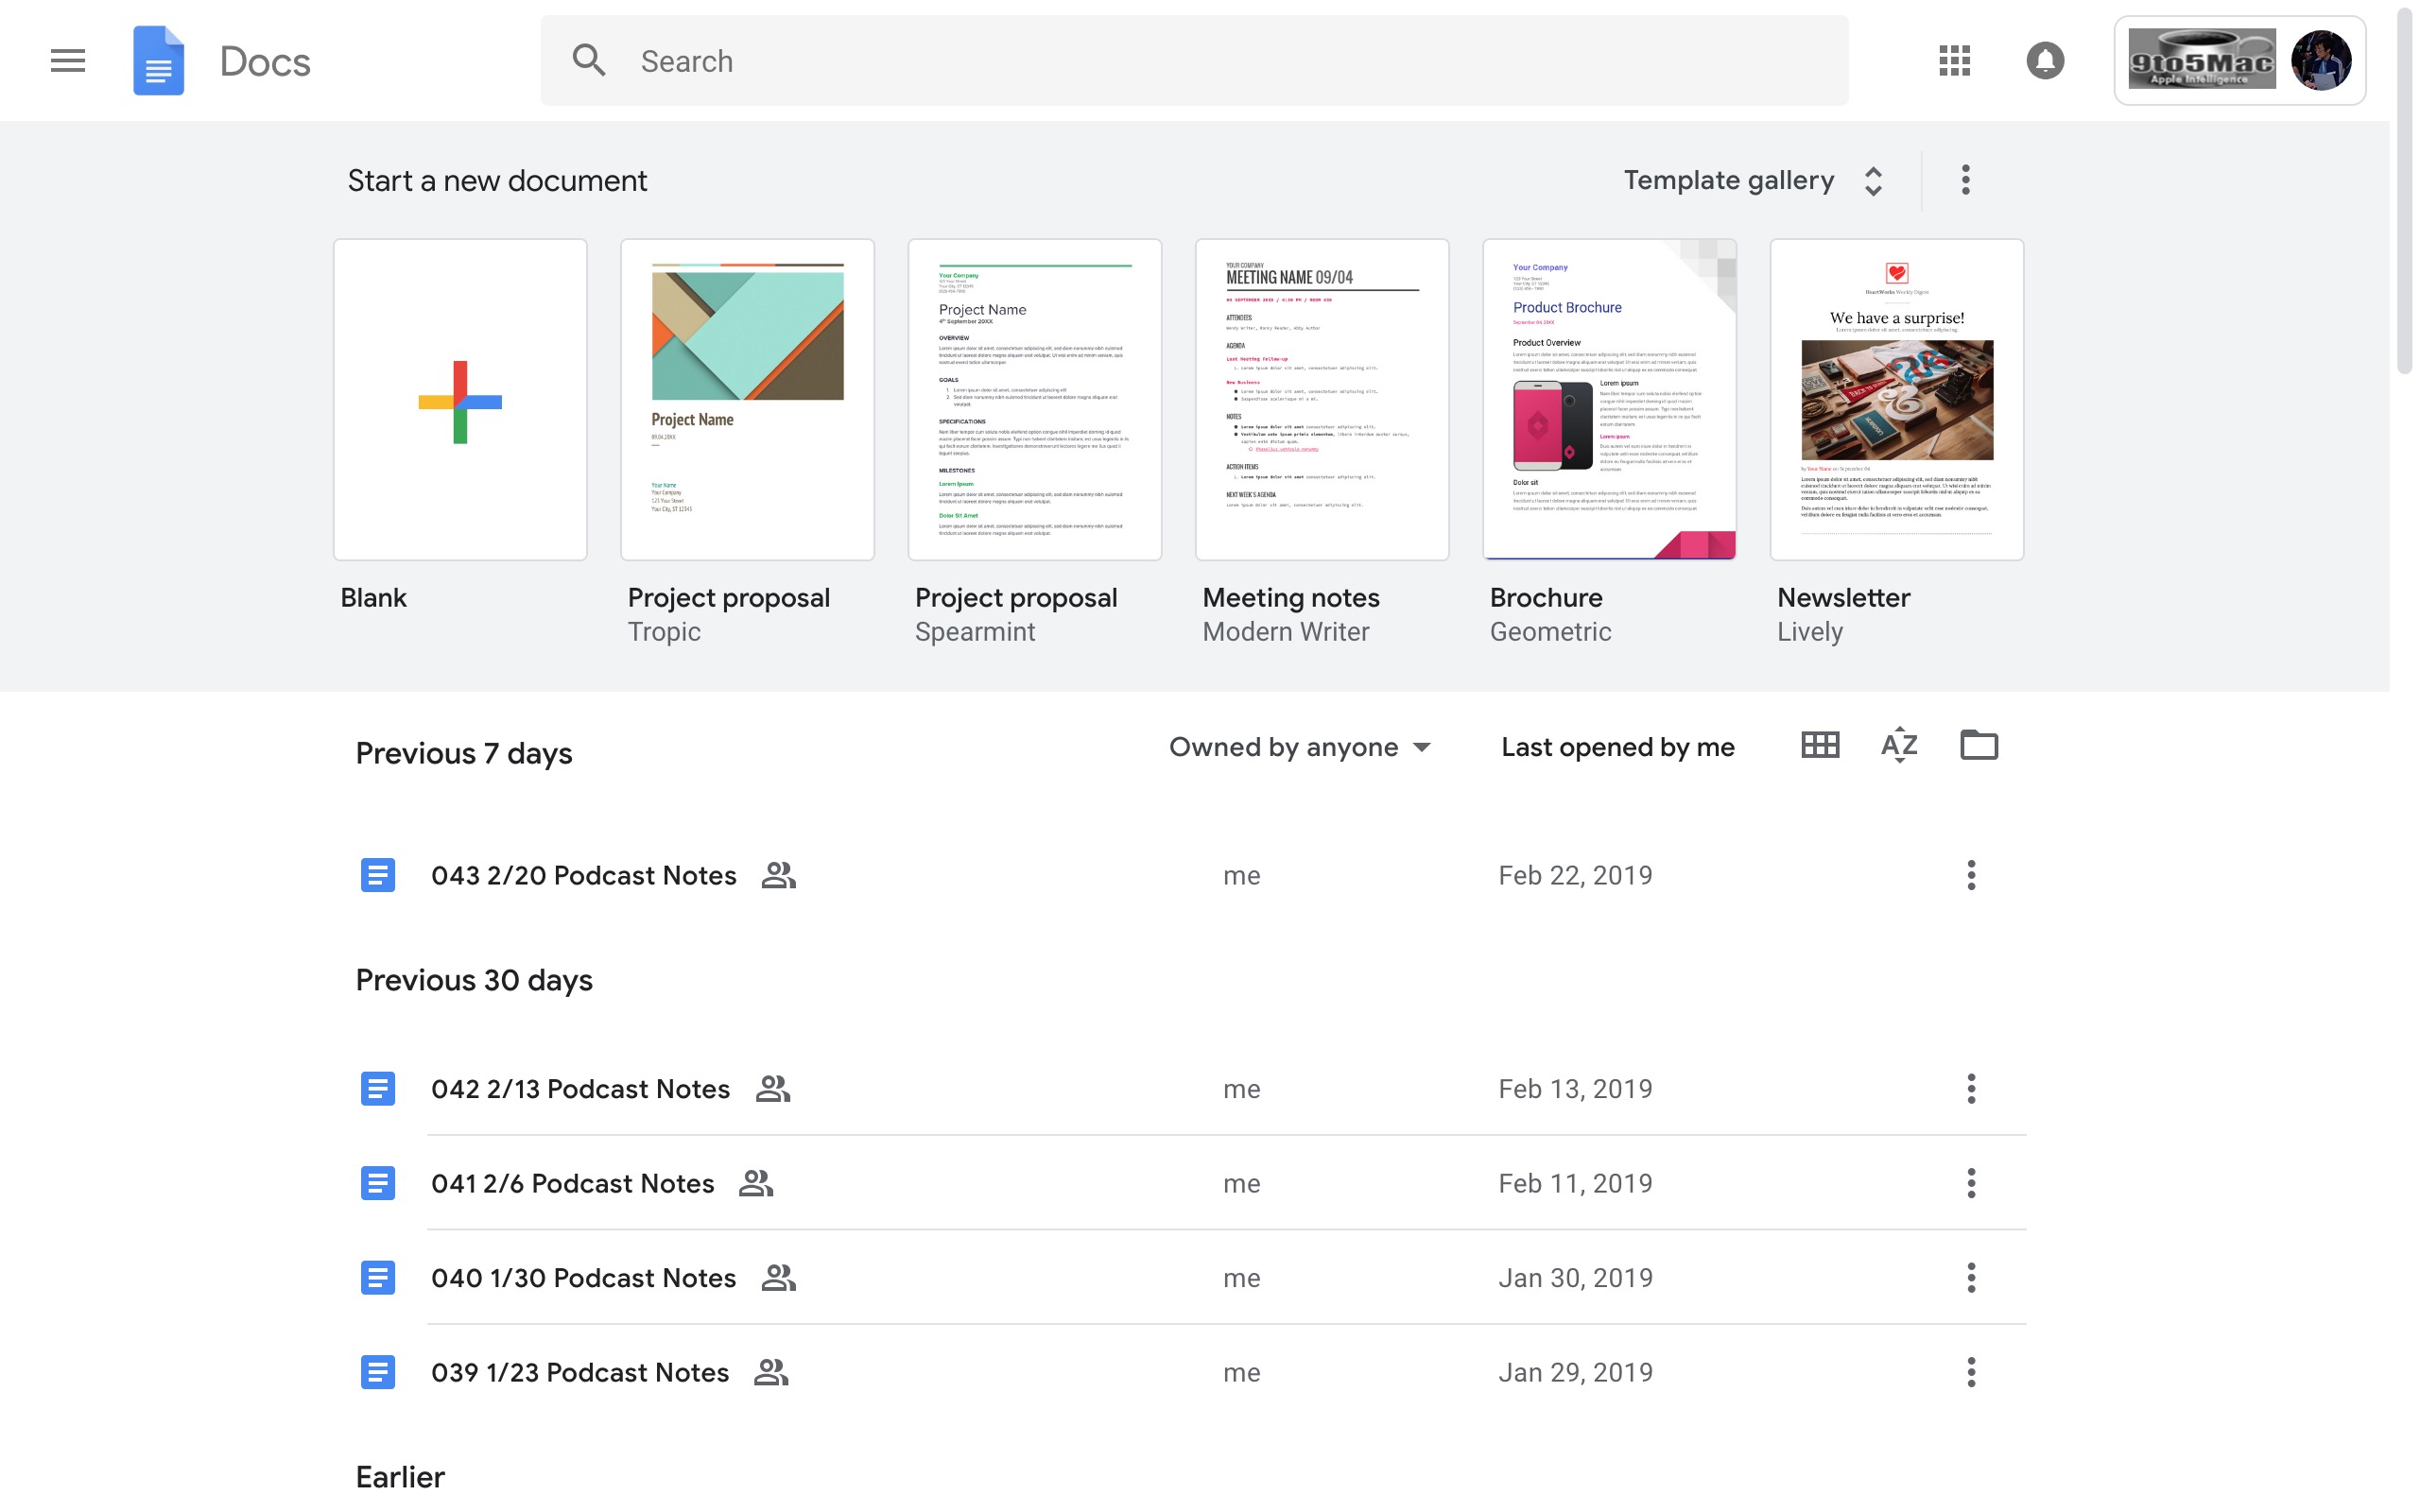 google-docs-sheets-and-slides-homepages-updated-with-material-theme